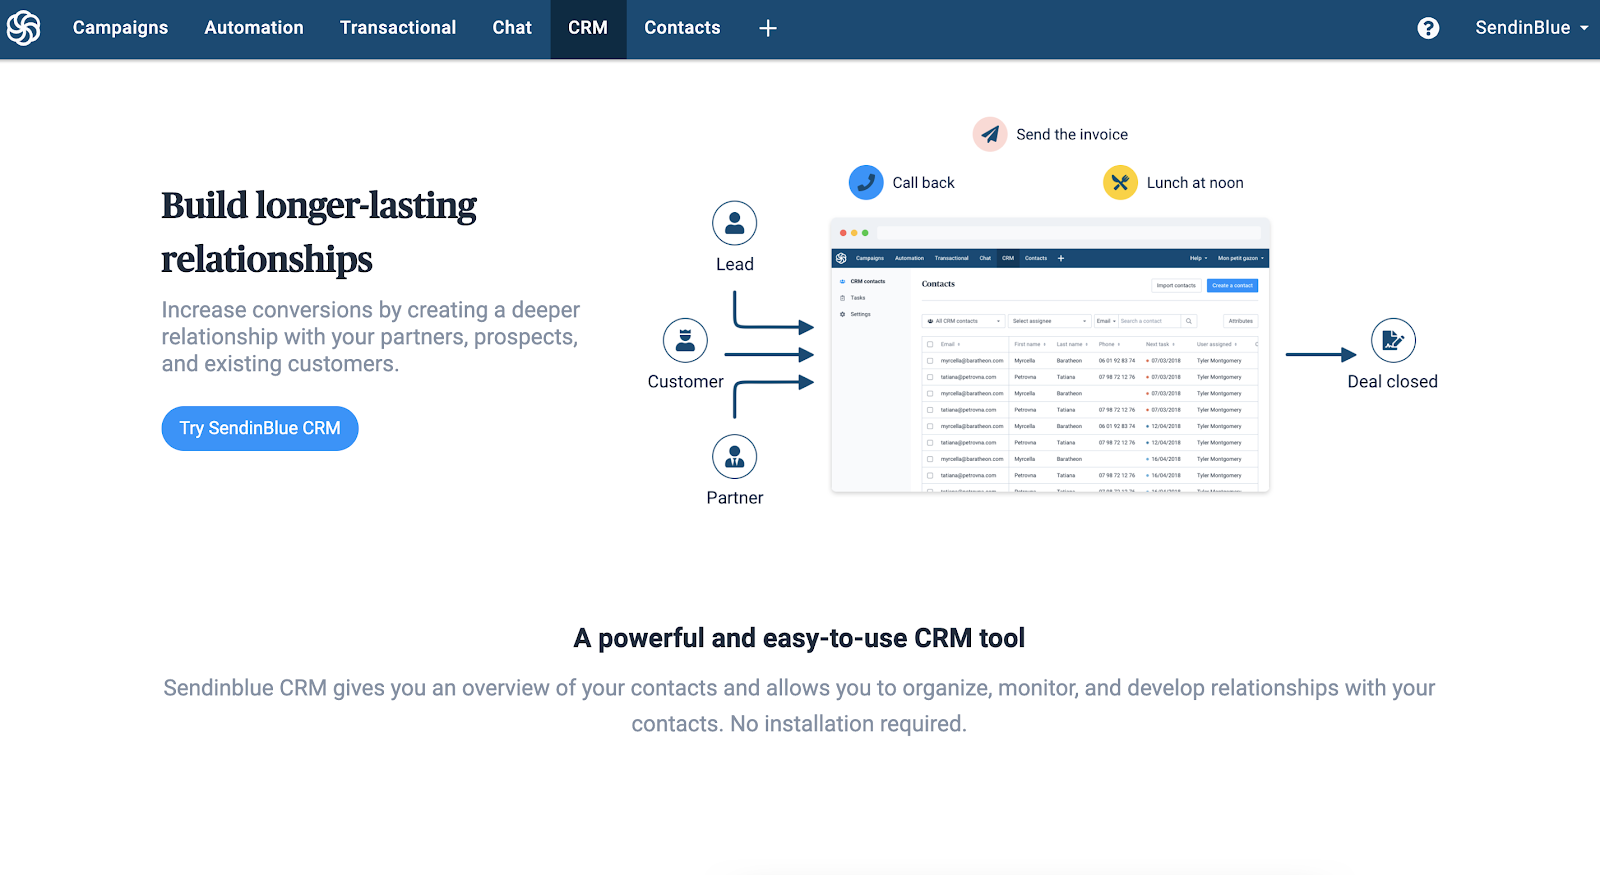 Powerful and easy-to-use CRM tool